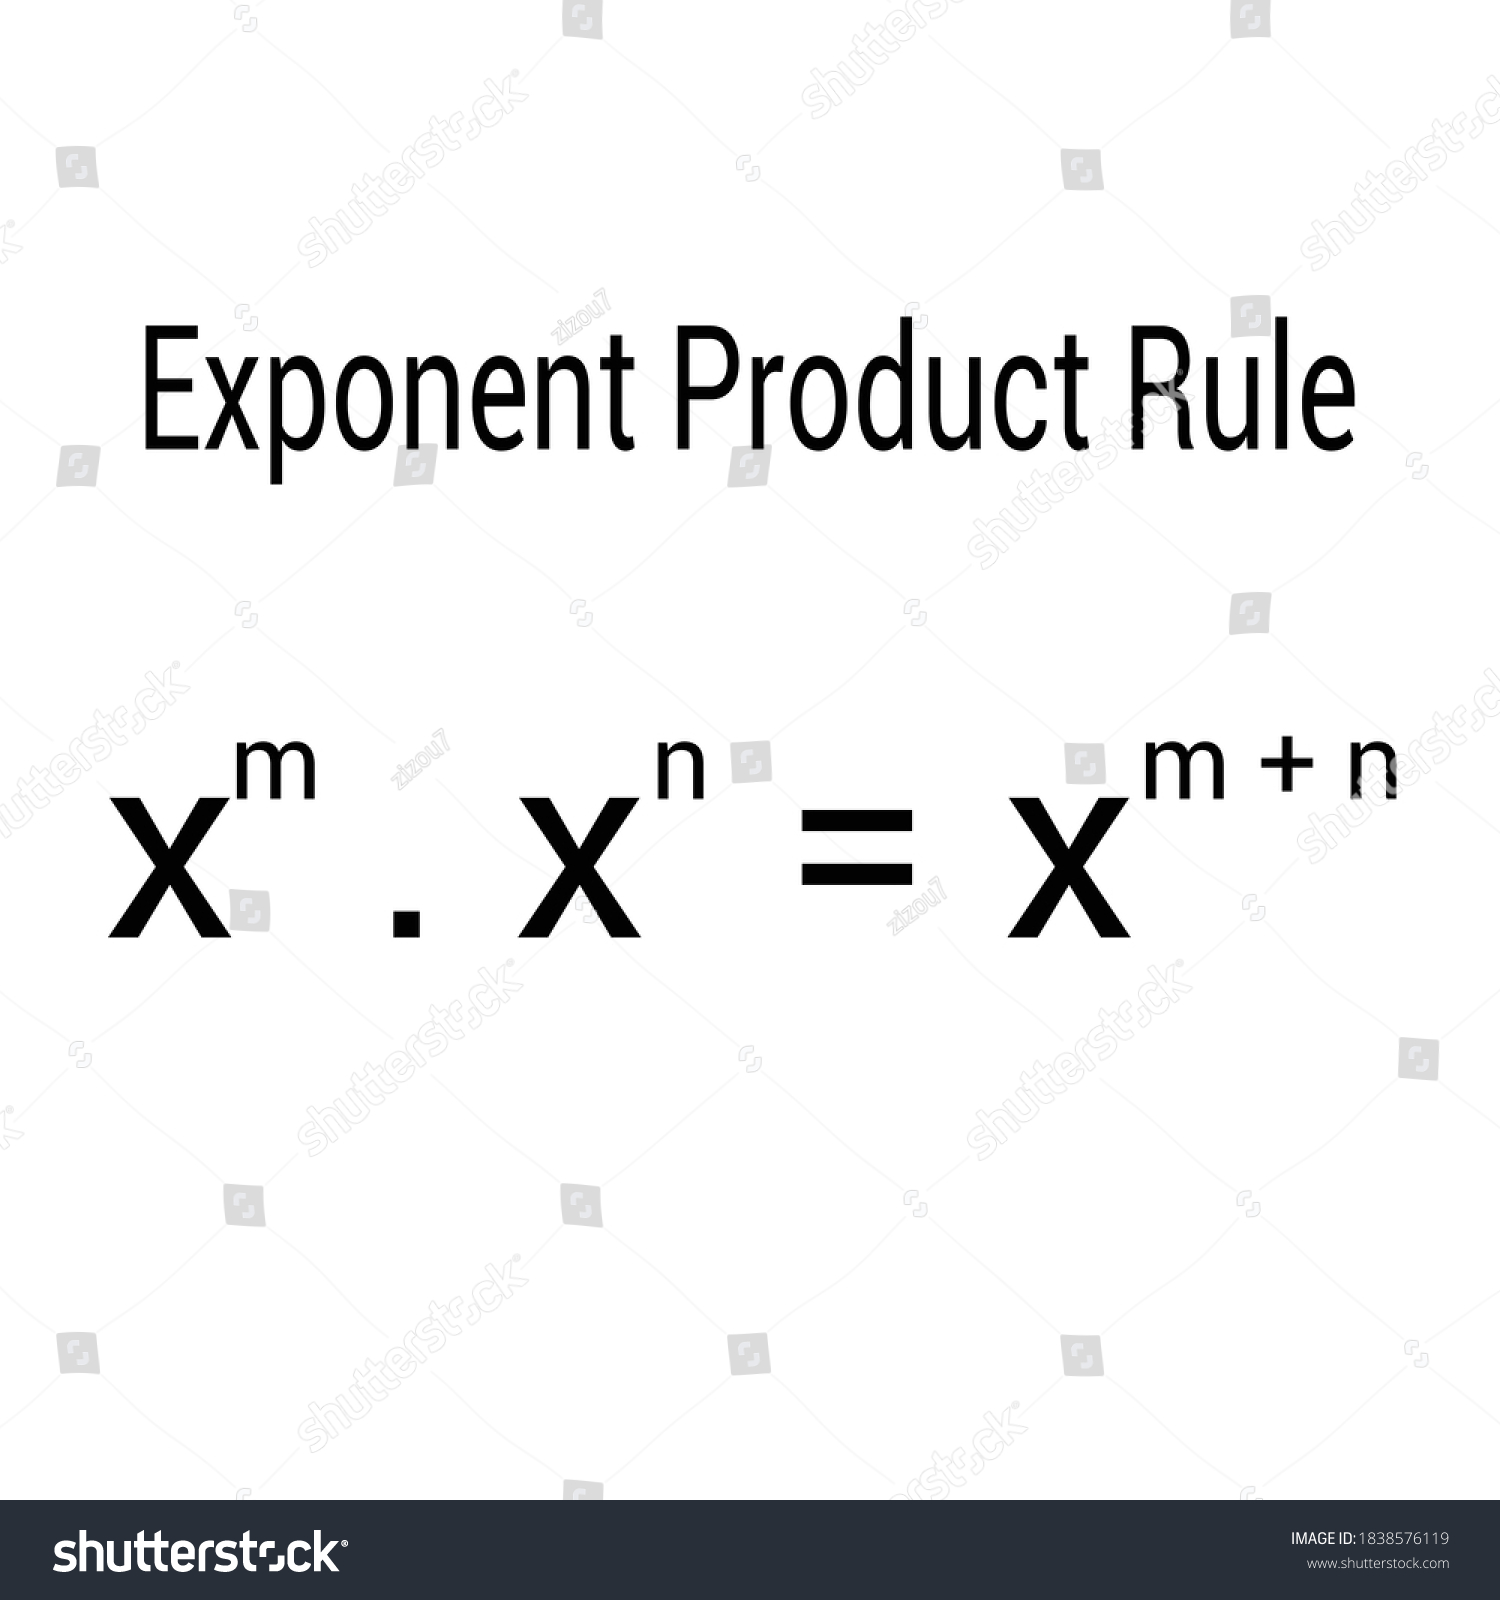 product rule Flashcards - Quizizz